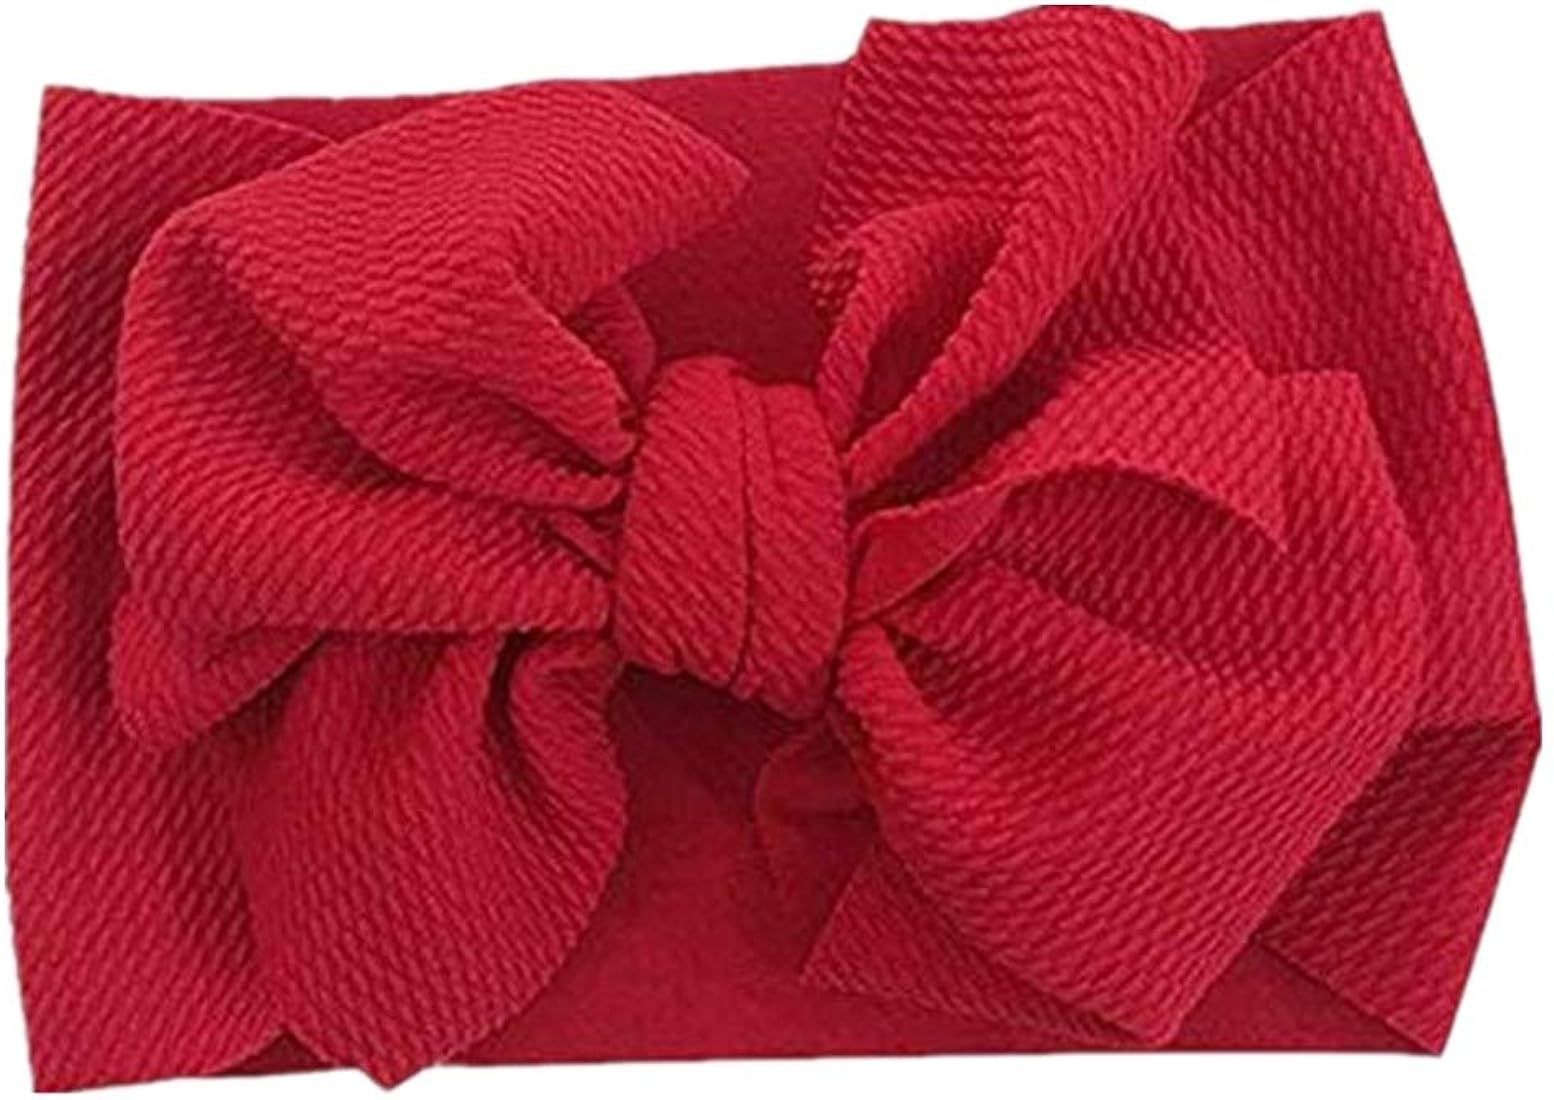 Infant Baby Girl Nylon Bow-knot Headband Newborn Headwrap Hair Accessories with Knotted Bow | Amazon (US)